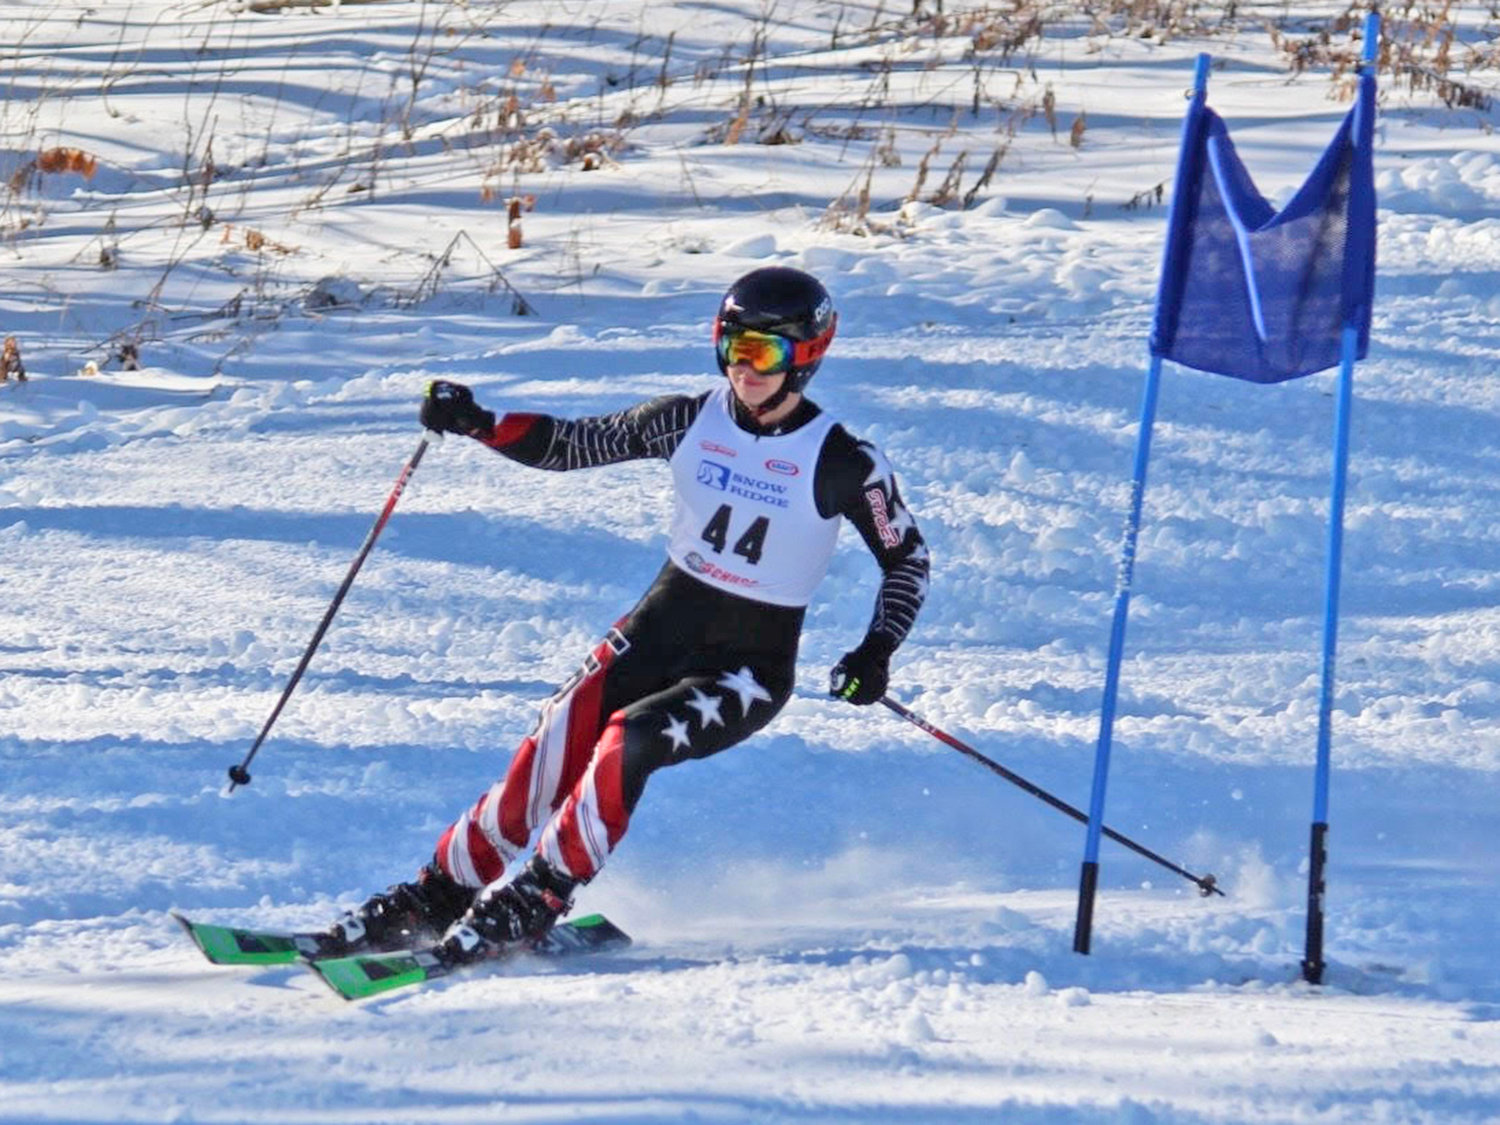 Dylan Poole of Camden placed 12th in two races Monday at Snow Ridge, the first competition for the school's alpine ski team this season.